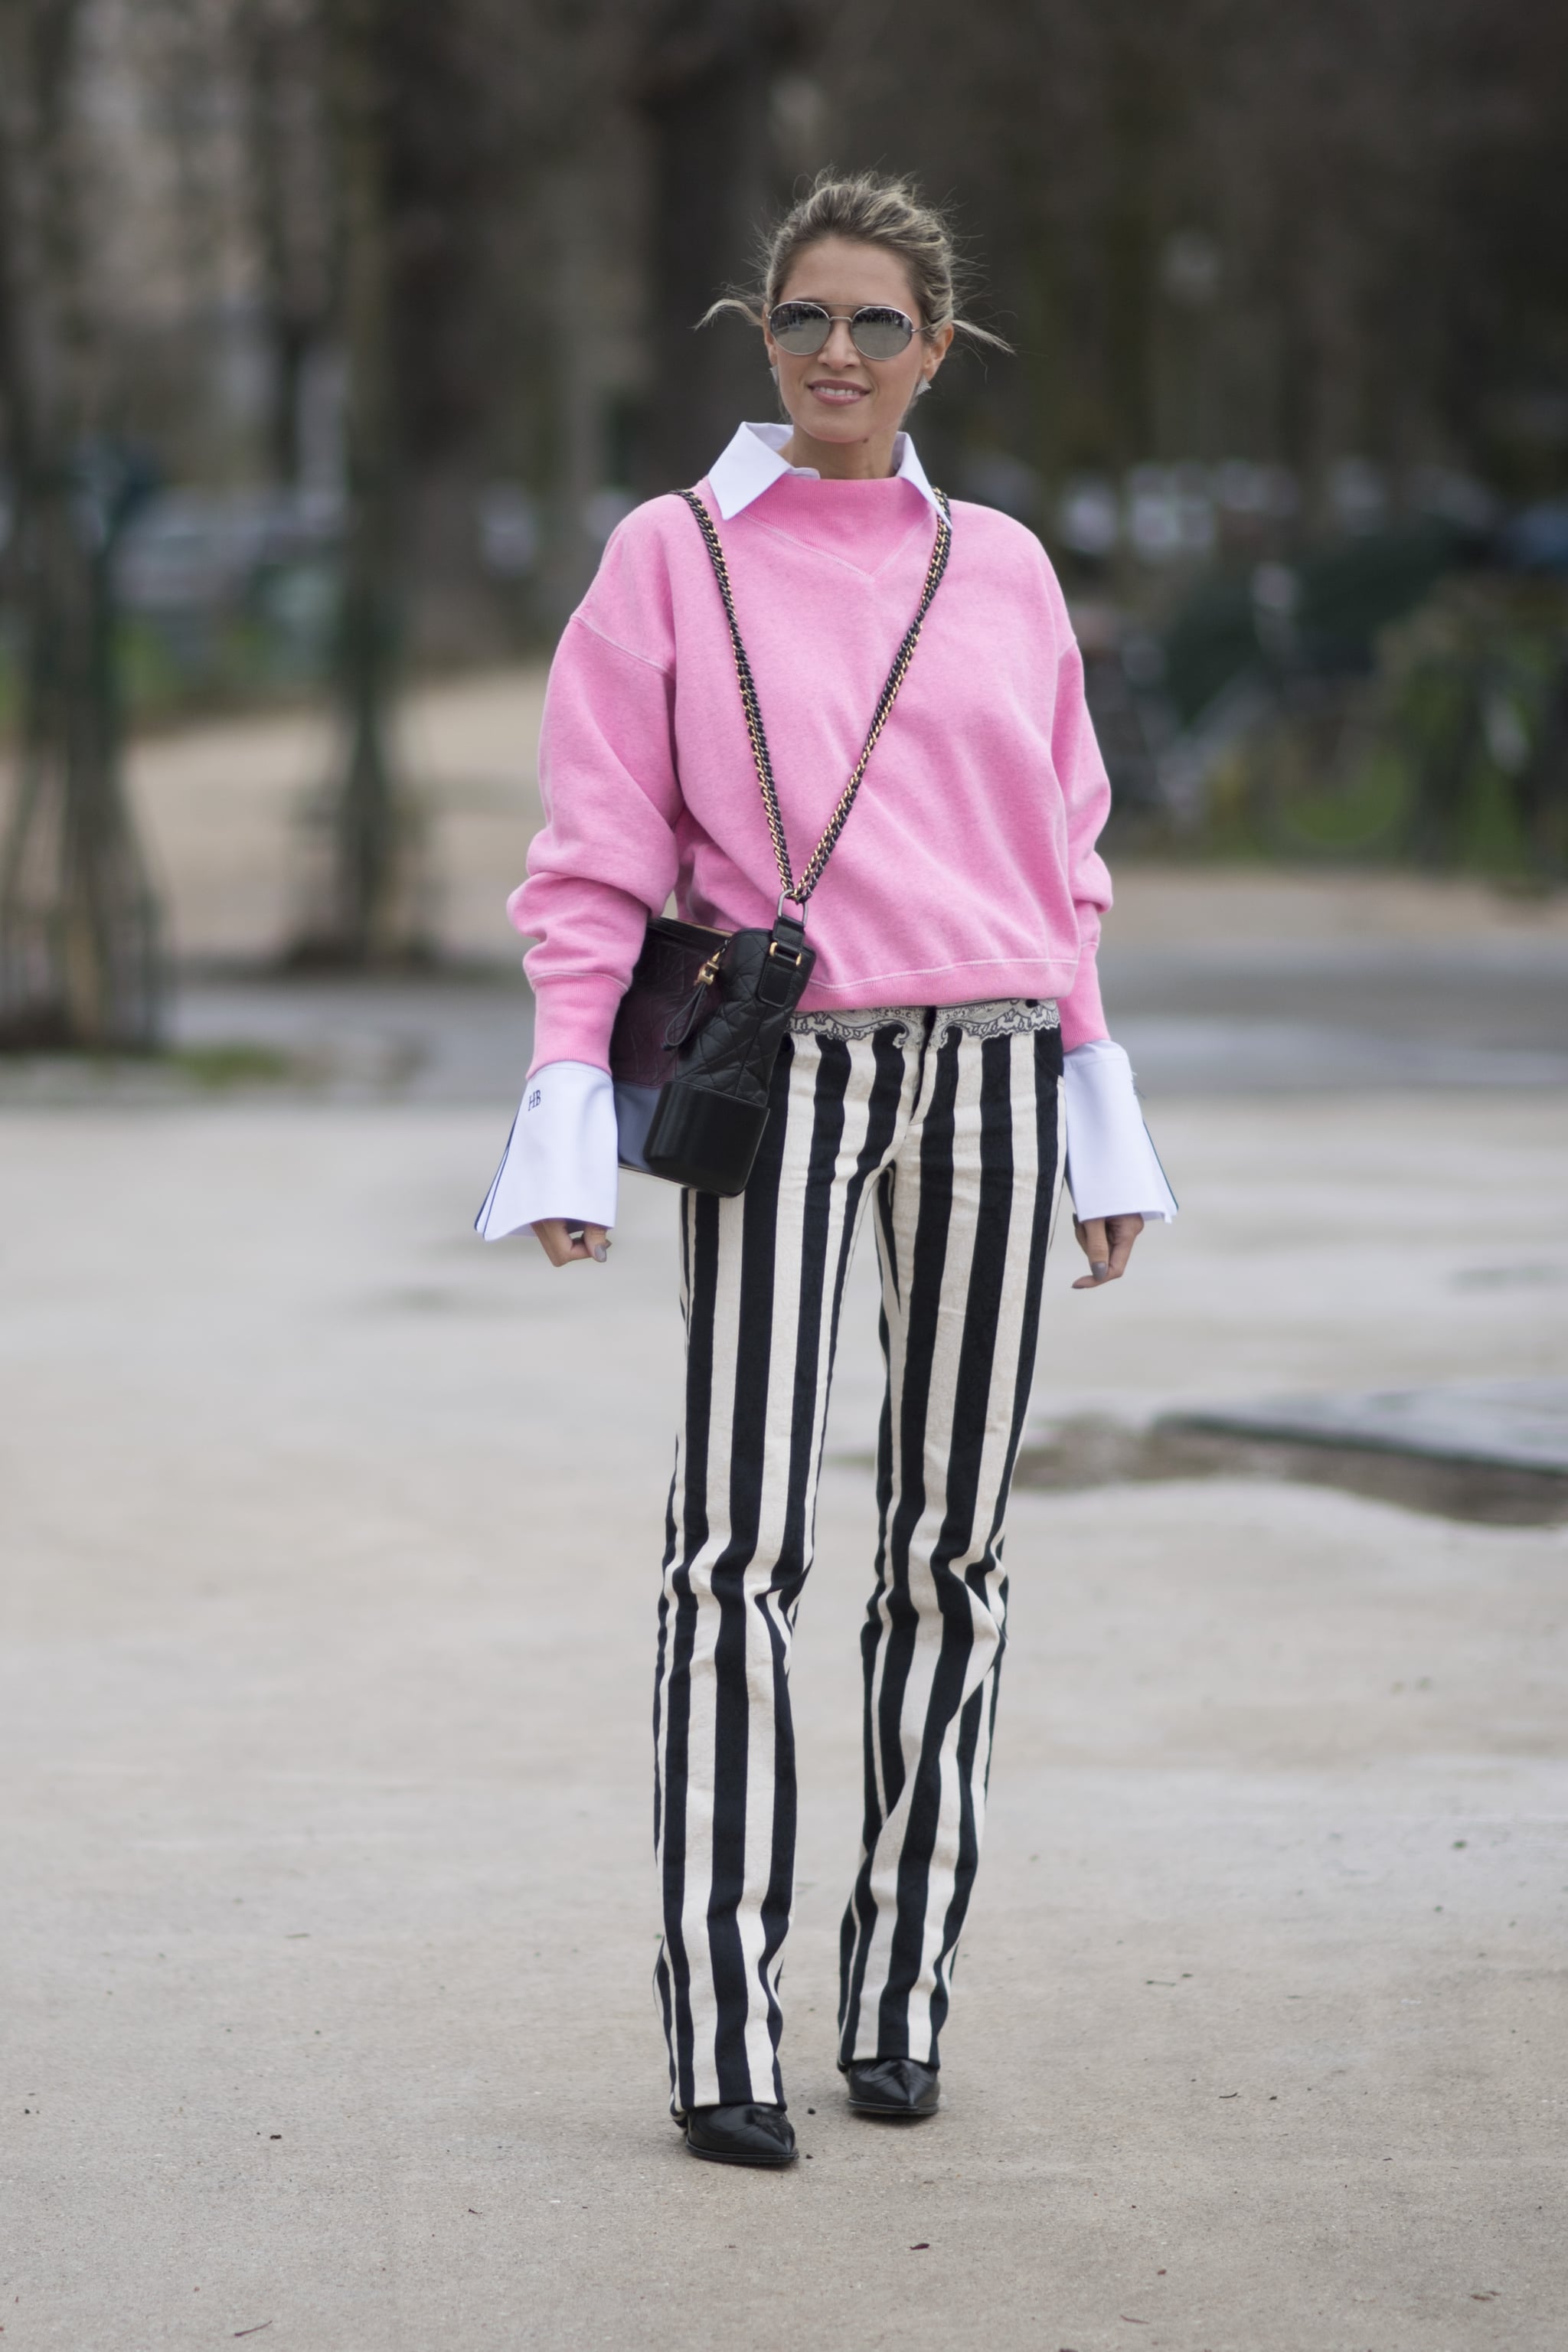 pink and white striped trousers